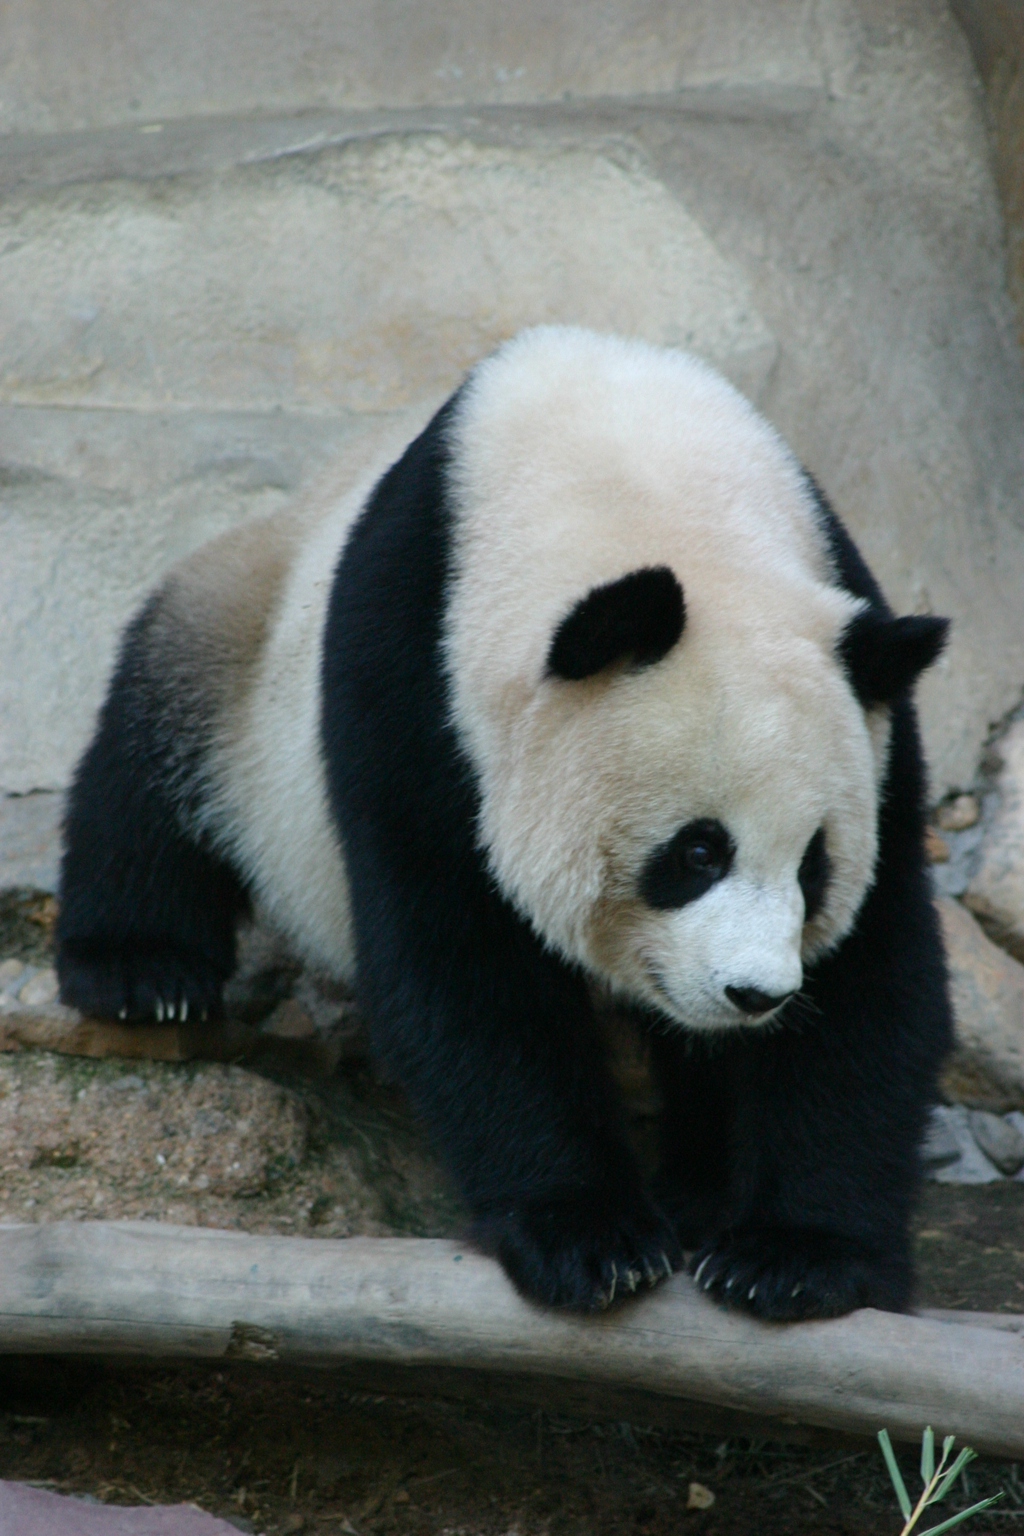 A giant panda in a zoo in China. Photo: from Wikipedia